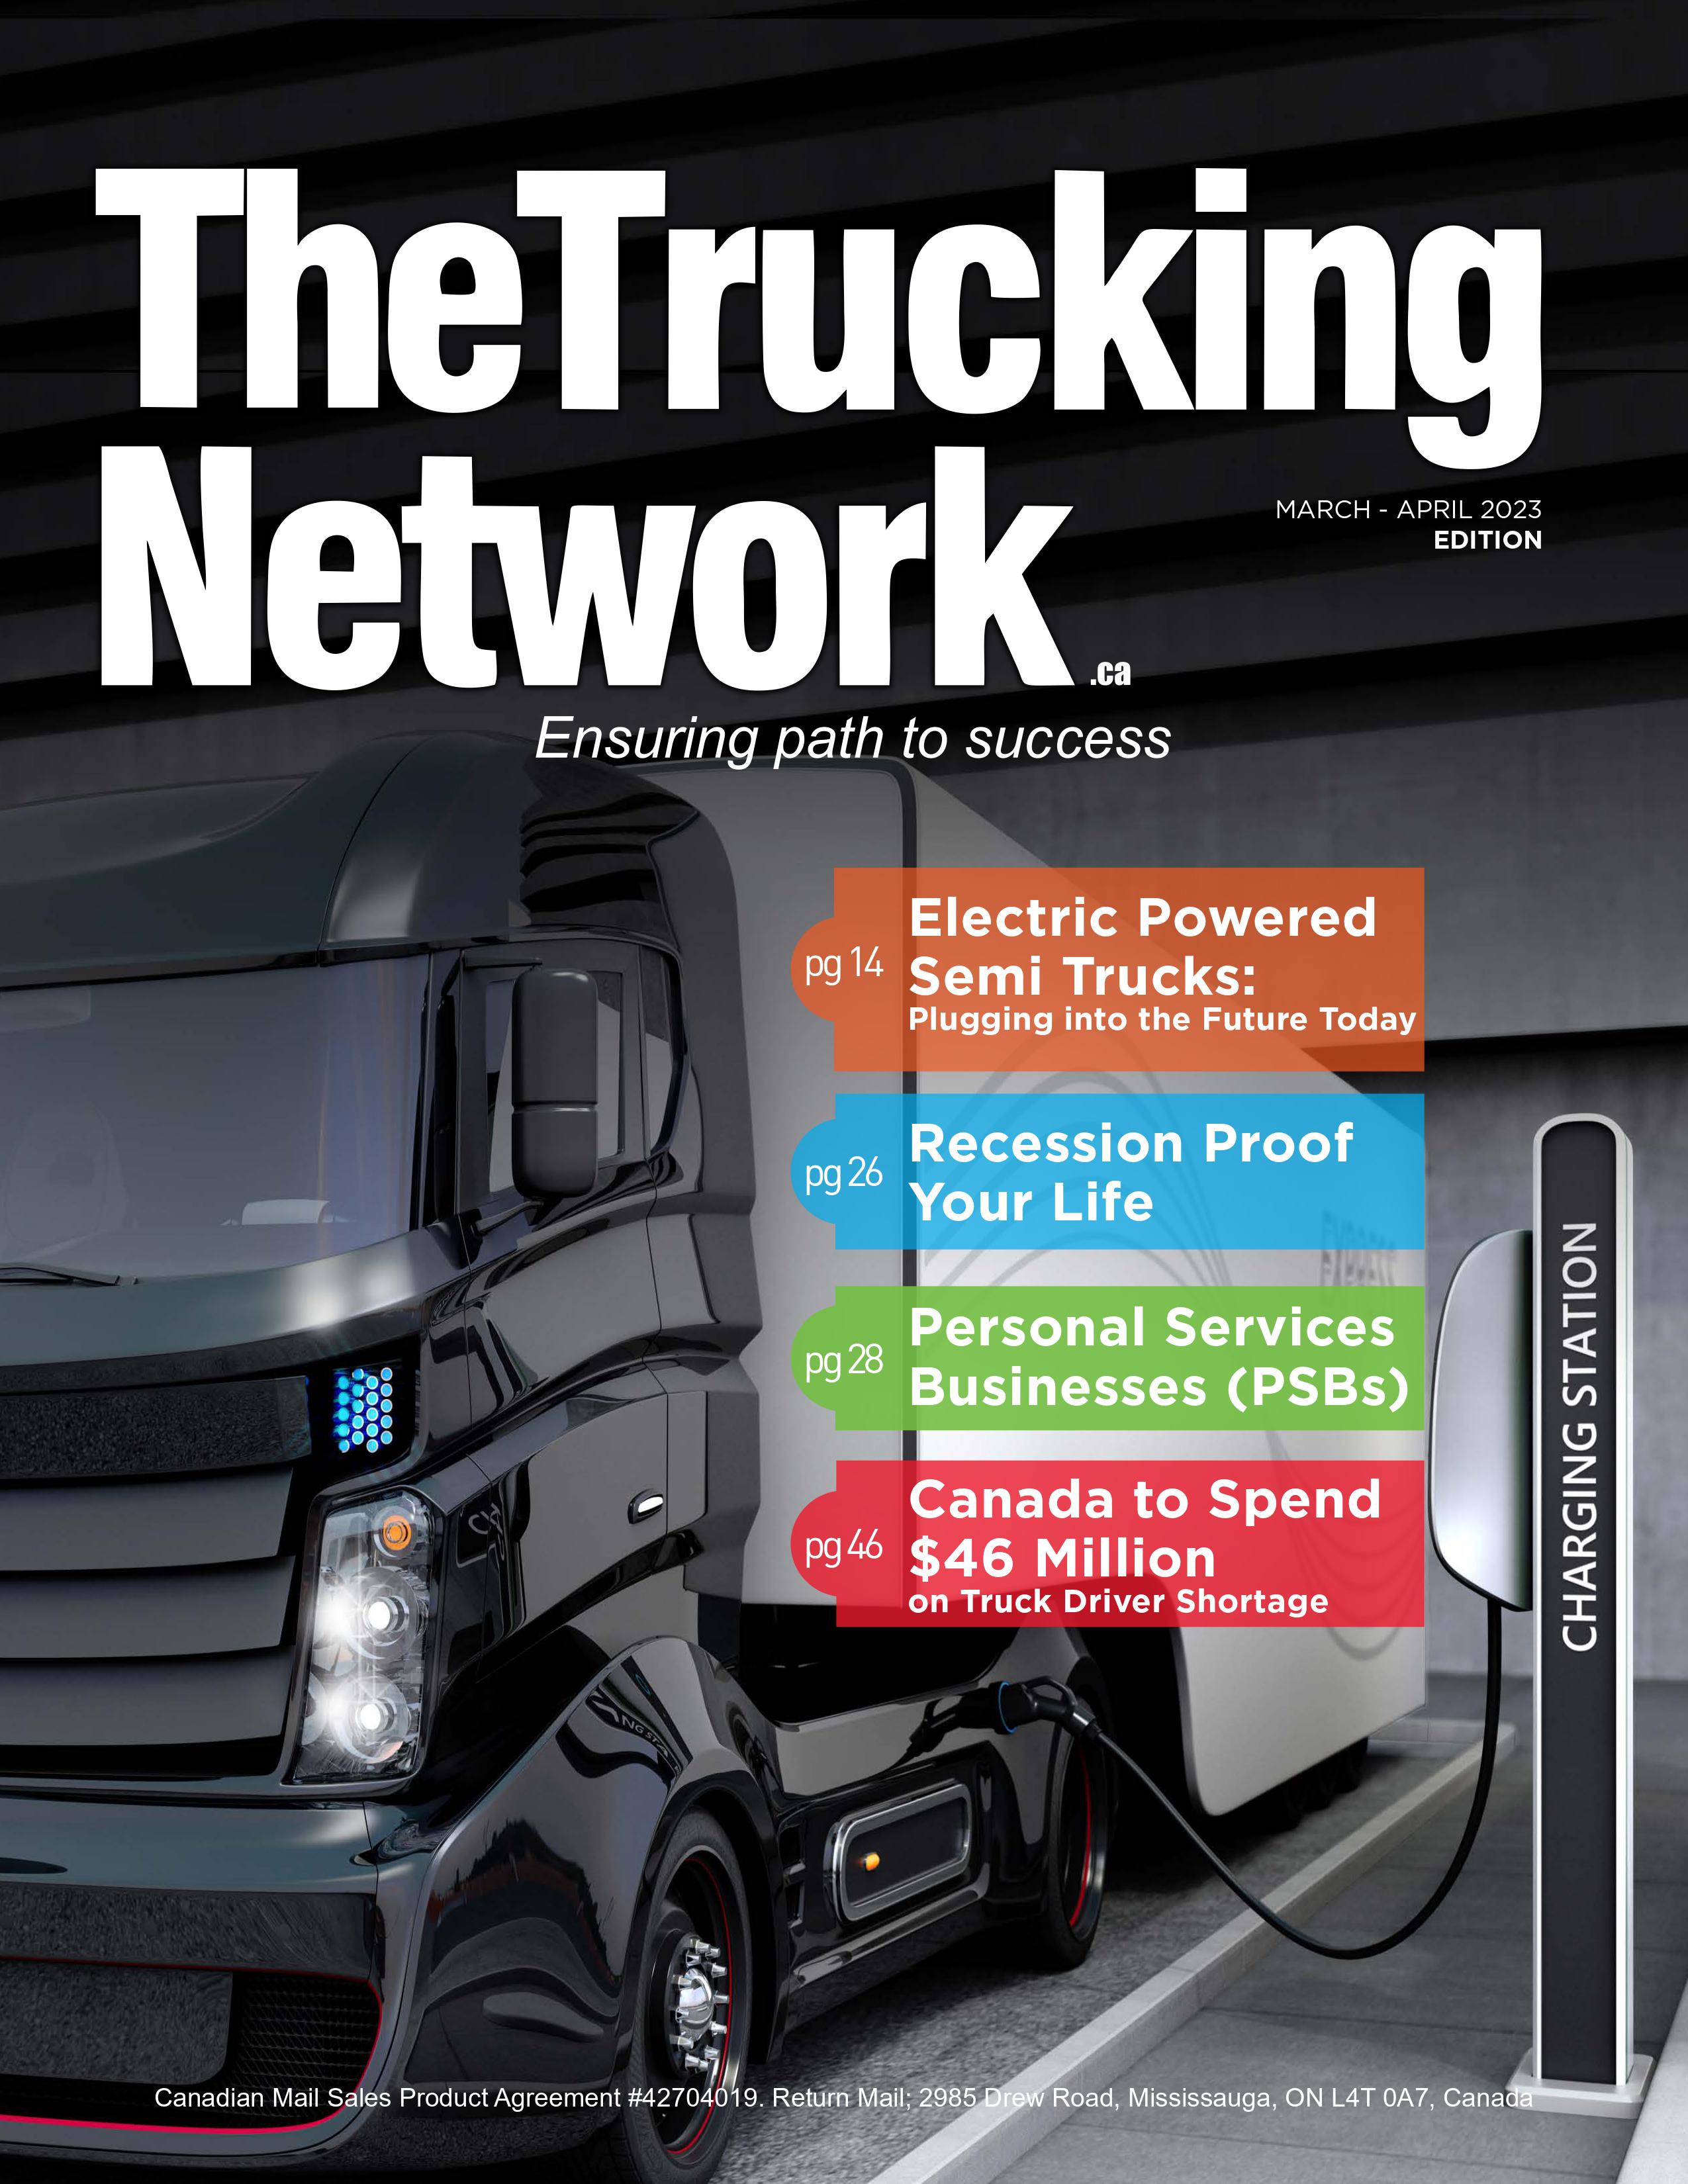 The Trucking Network Magazine March-April 2023 Edition